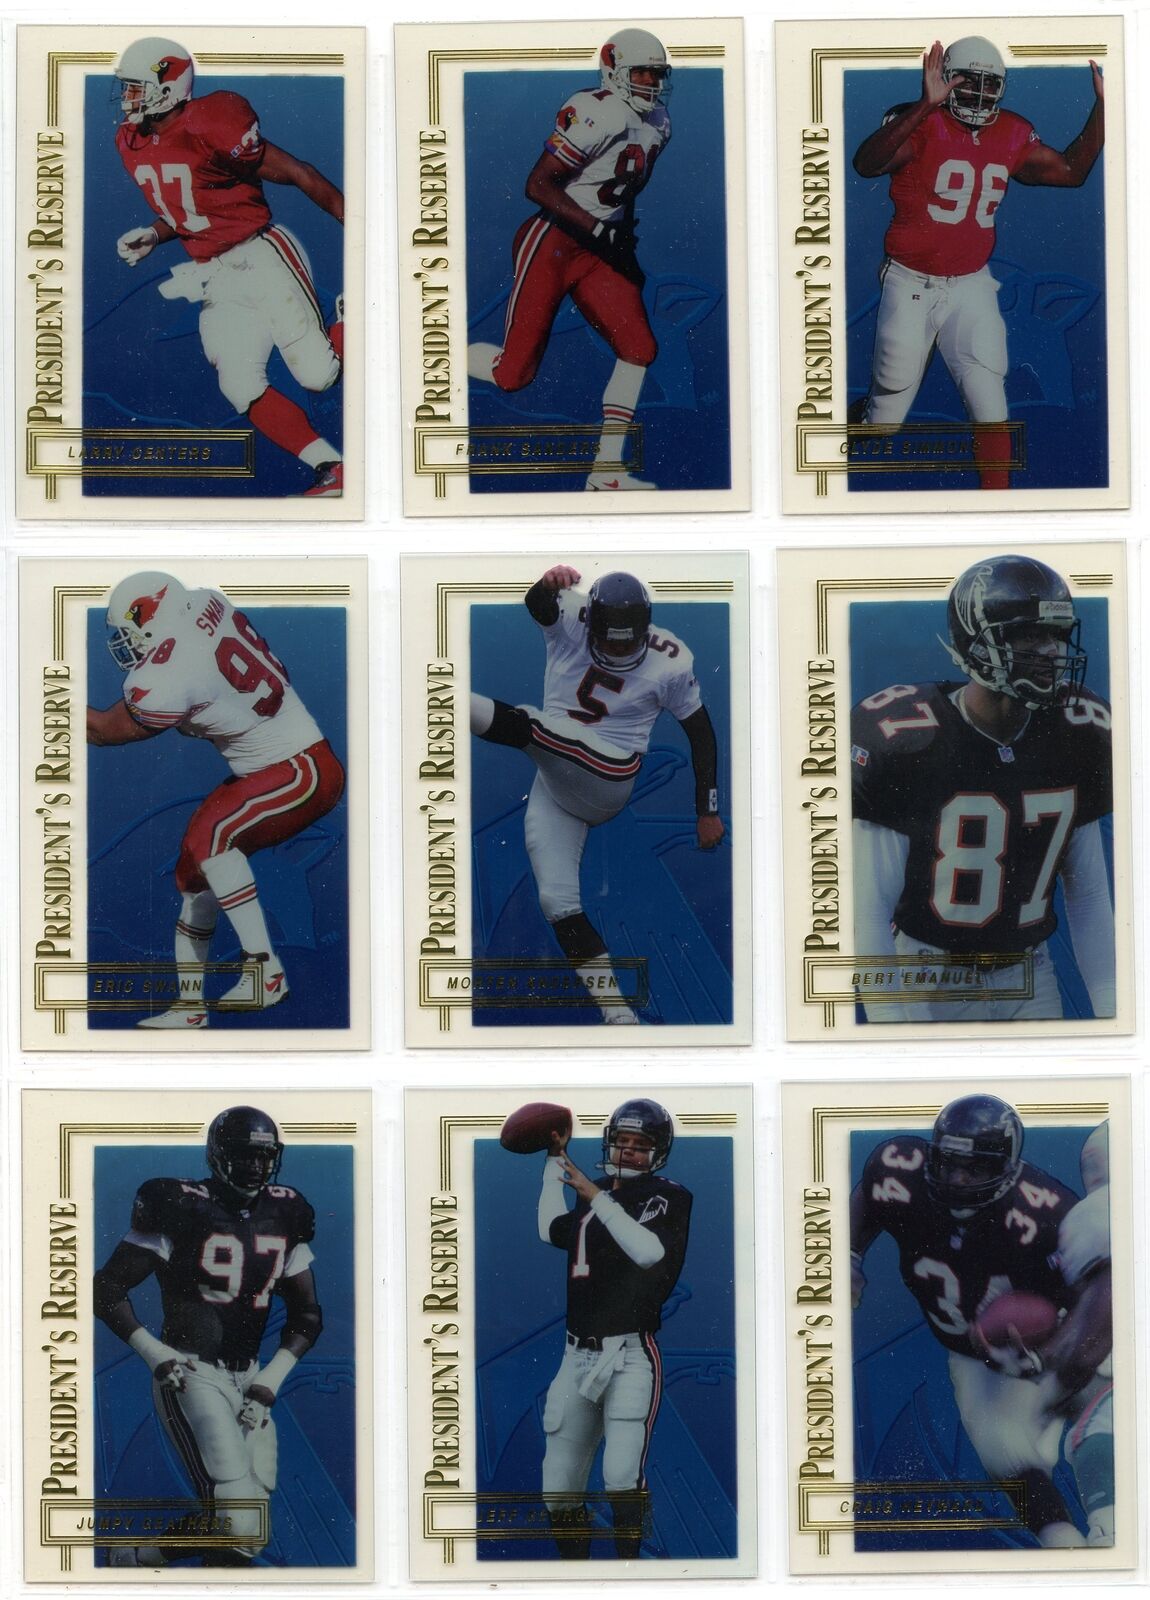 1996 CE PRESIDENT'S RESERVE NFL football complete set of 400 cards Image 1